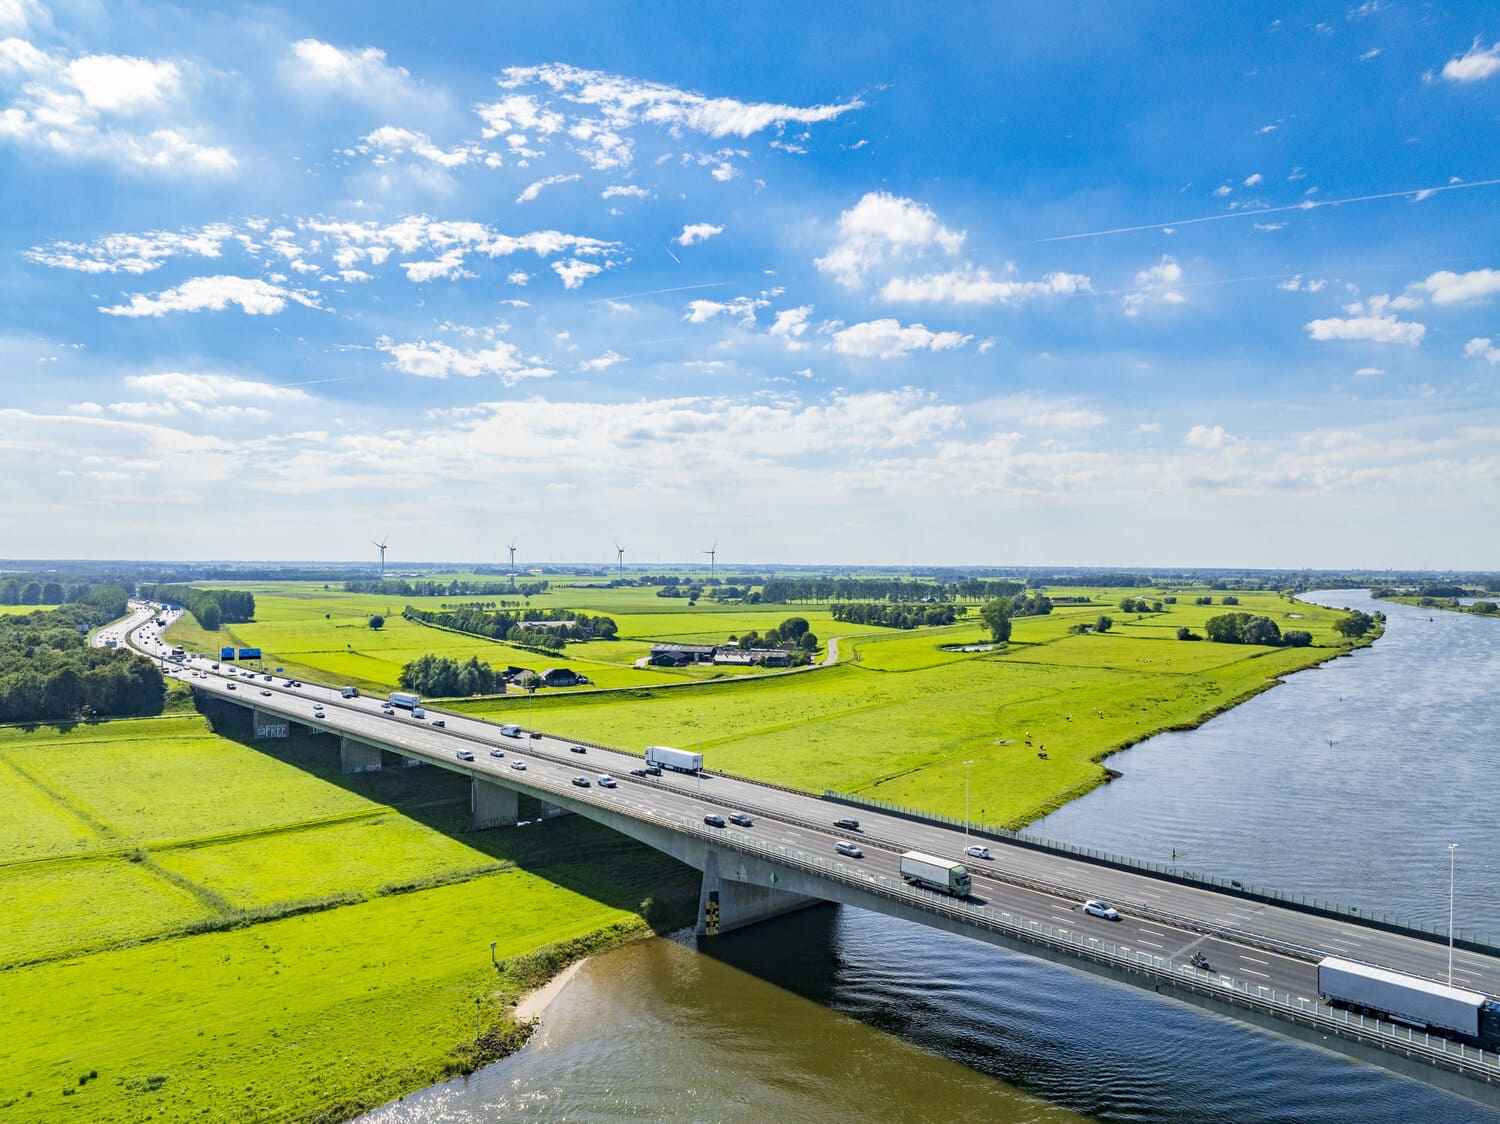 Aerial view of a Dutch landscape featuring a long highway bridge crossing a river. The bridge is surrounded by lush green fields and farmland. Cars can be seen driving on the bridge.